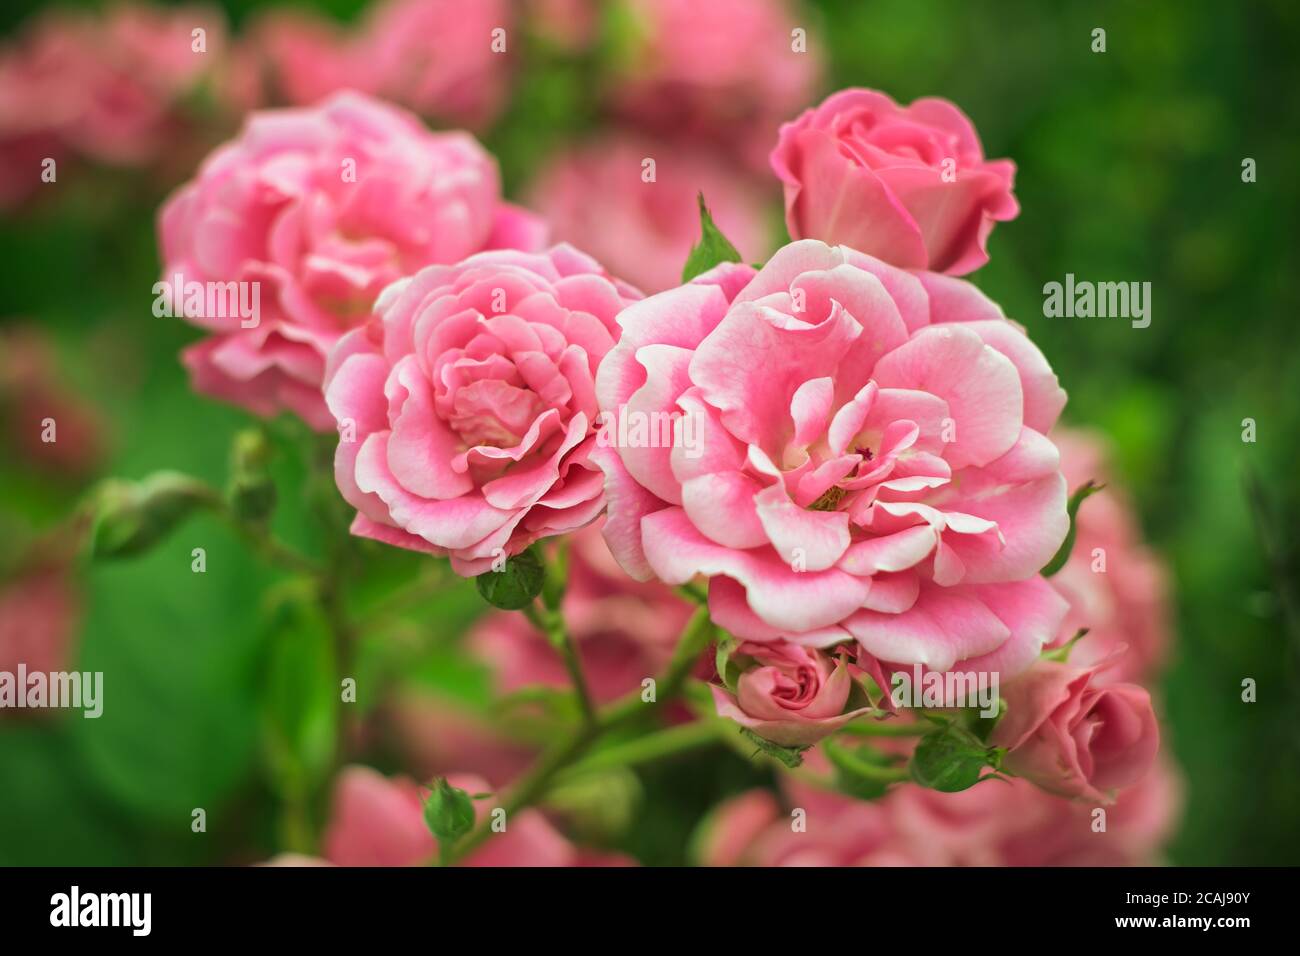 Garden roses, wild pink flowers, rose bush, landscaping. Colorful nature background. Bright floral wallpaper. Selective focus. Gift card. Ornamental p Stock Photo